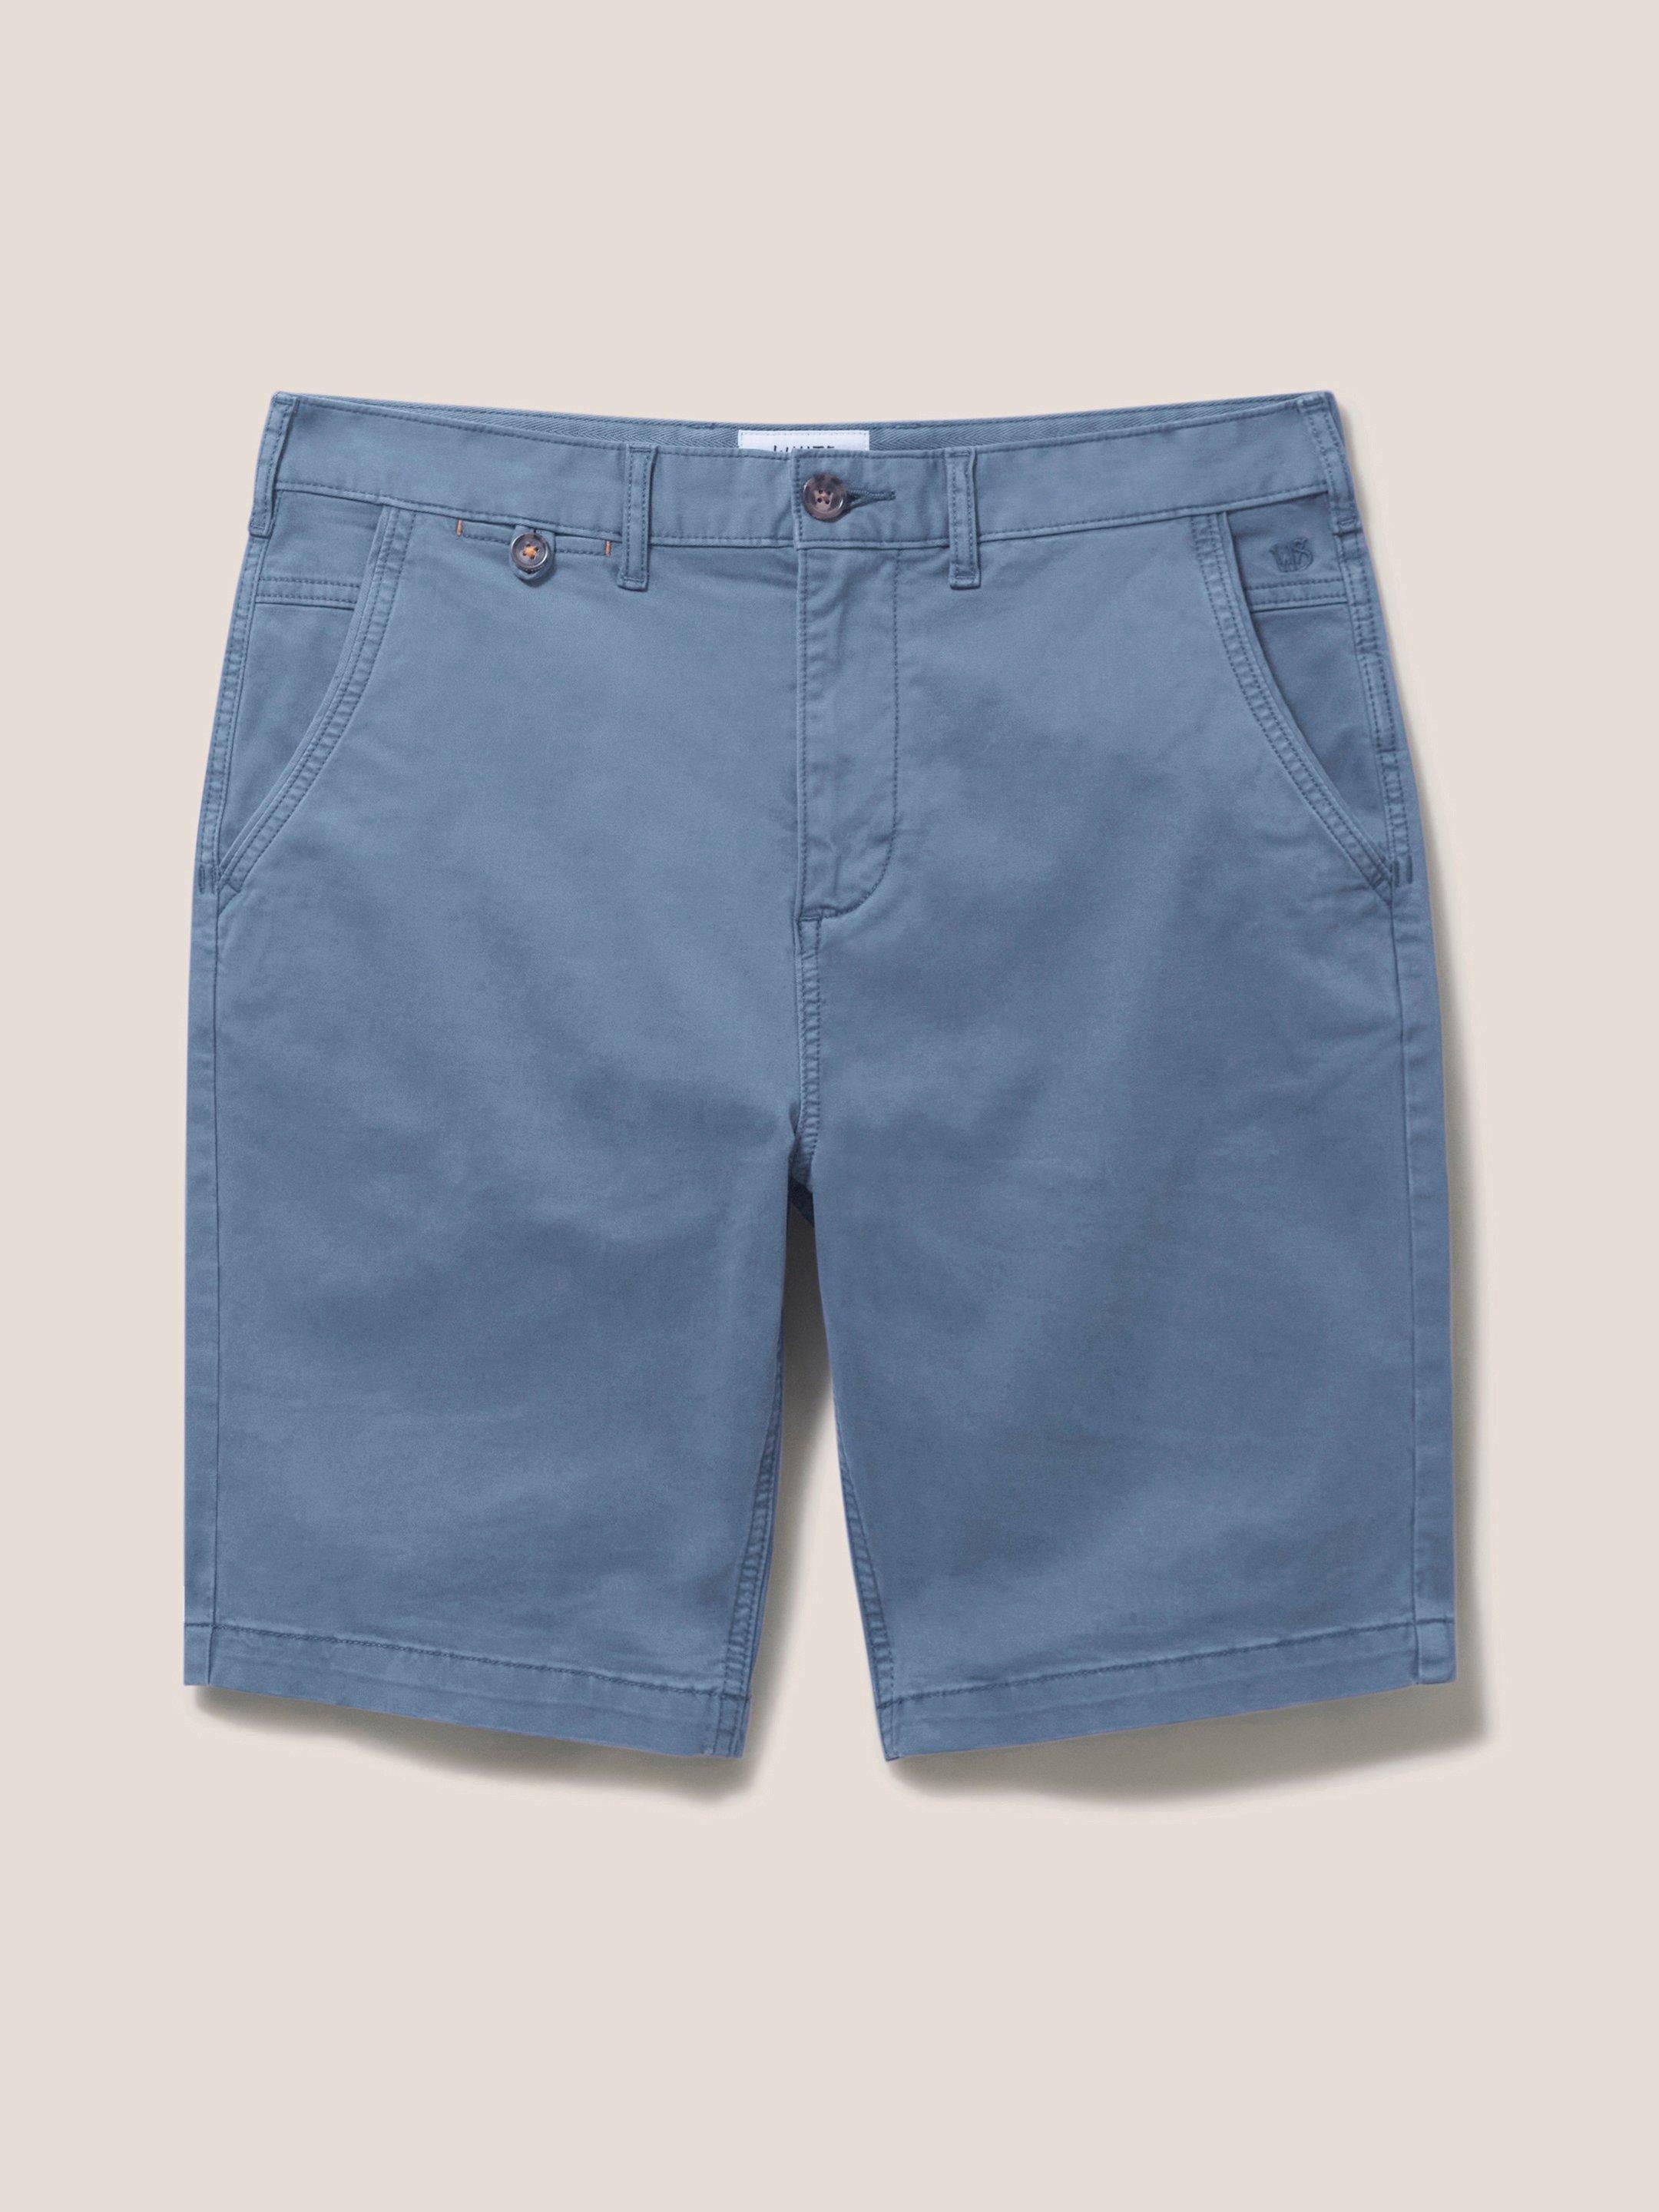 Sutton Slim Fit Chino Short in DEEP BLUE - FLAT FRONT